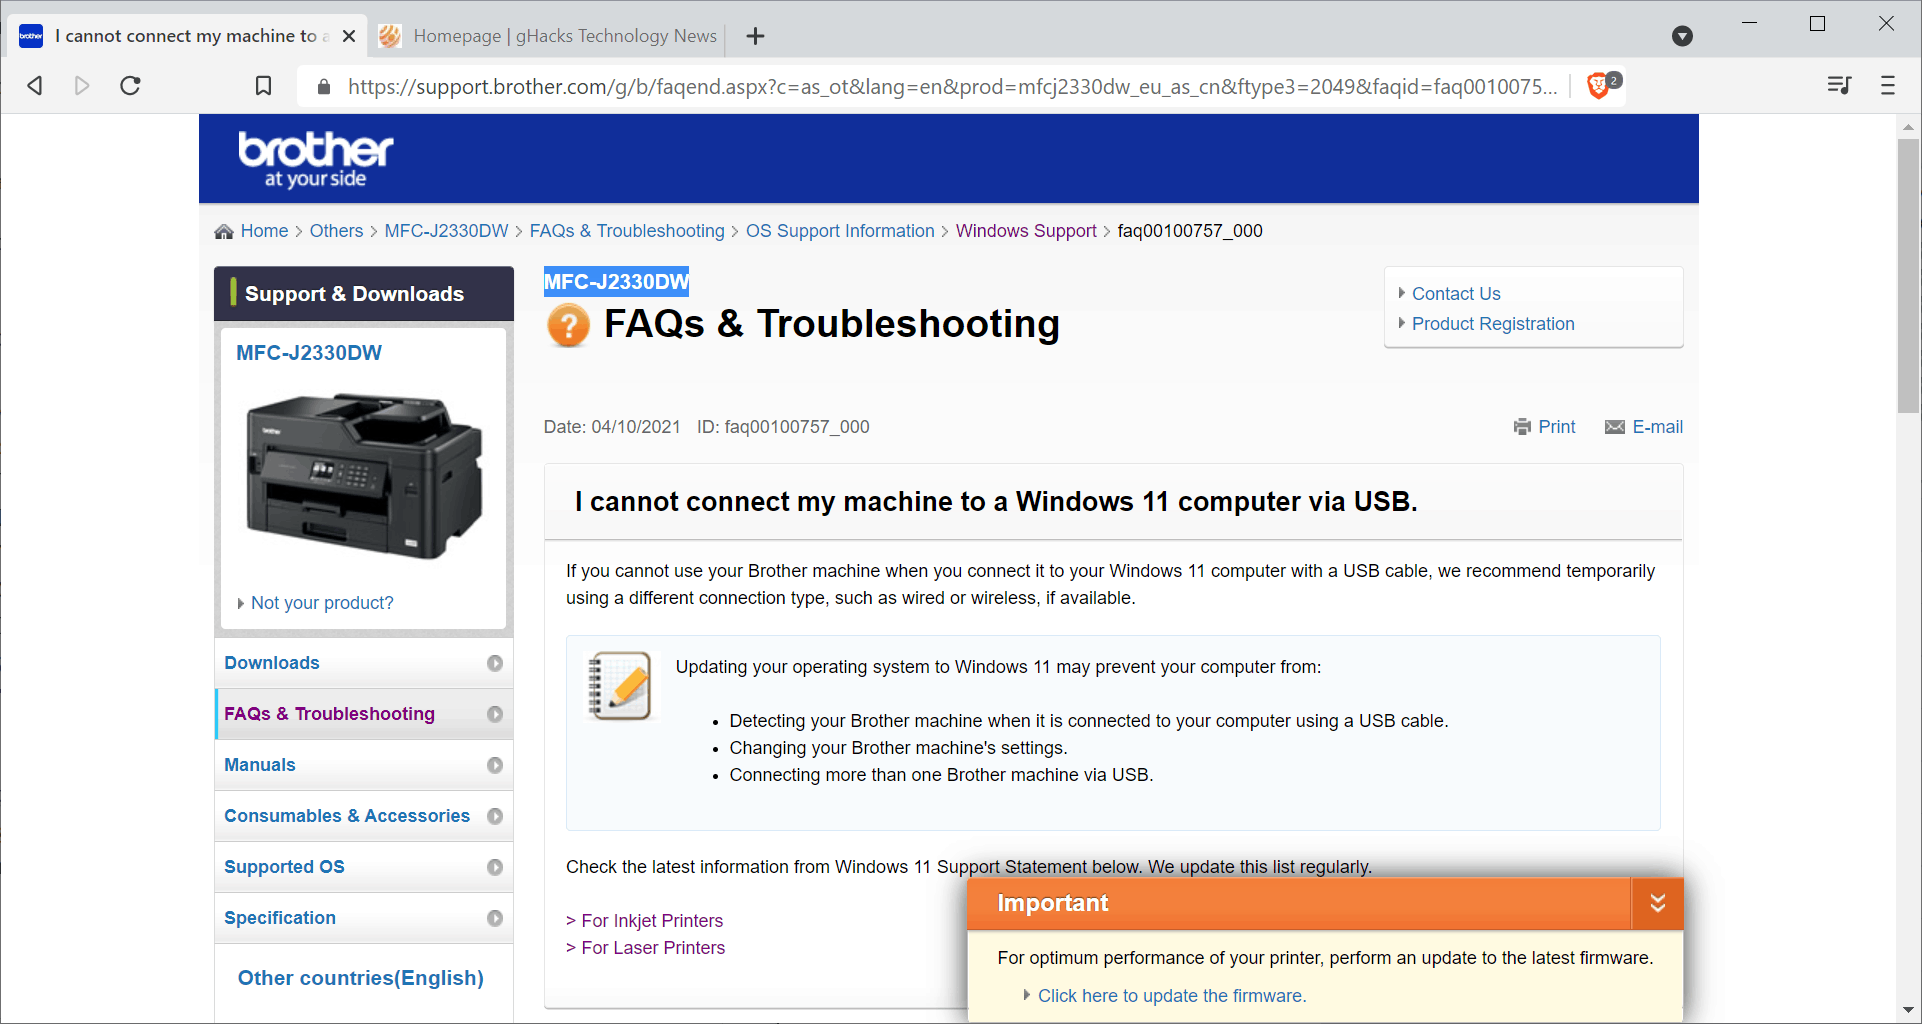 Brother confirms Windows 11 printer issues brother-printer-connection-issue-windows-11.png